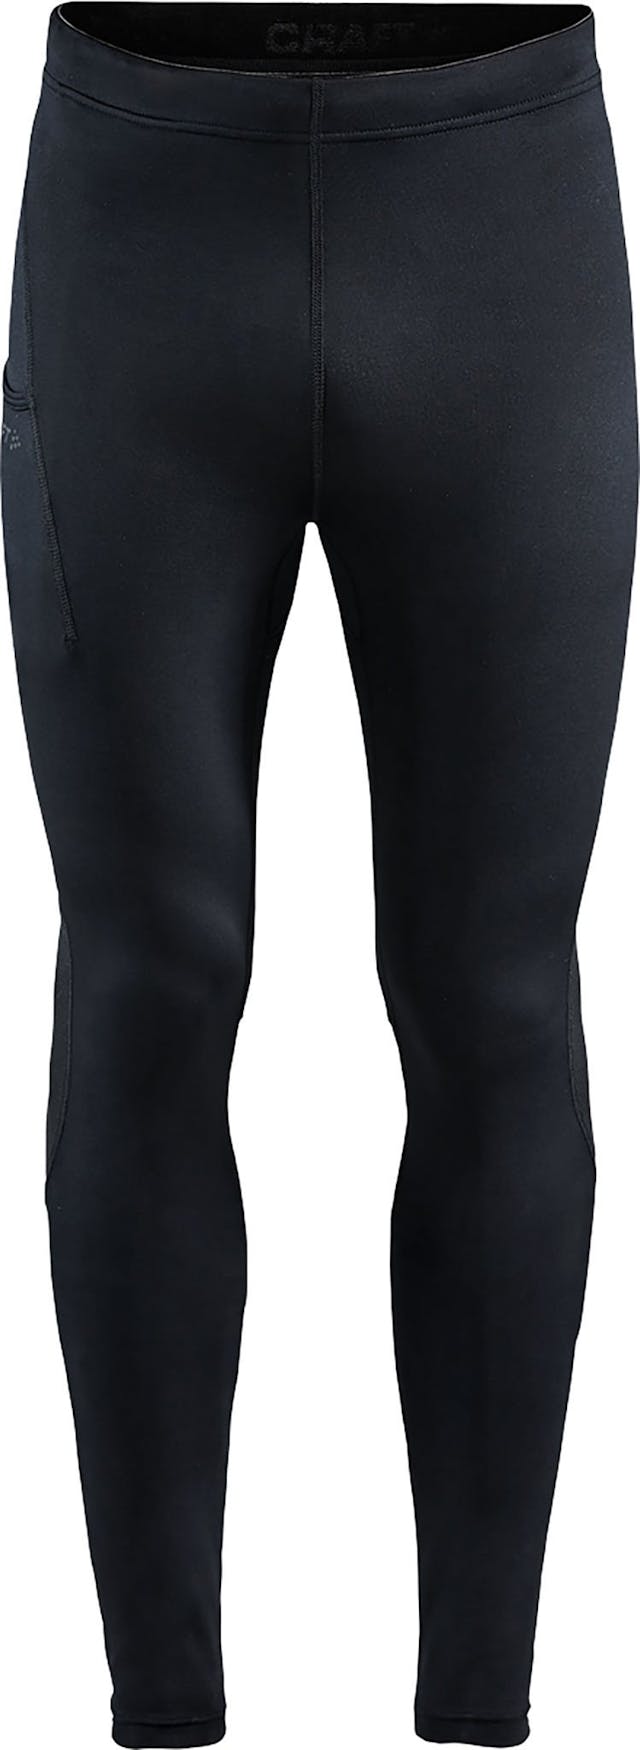 Product image for ADV Essence Zip Tights - Men's